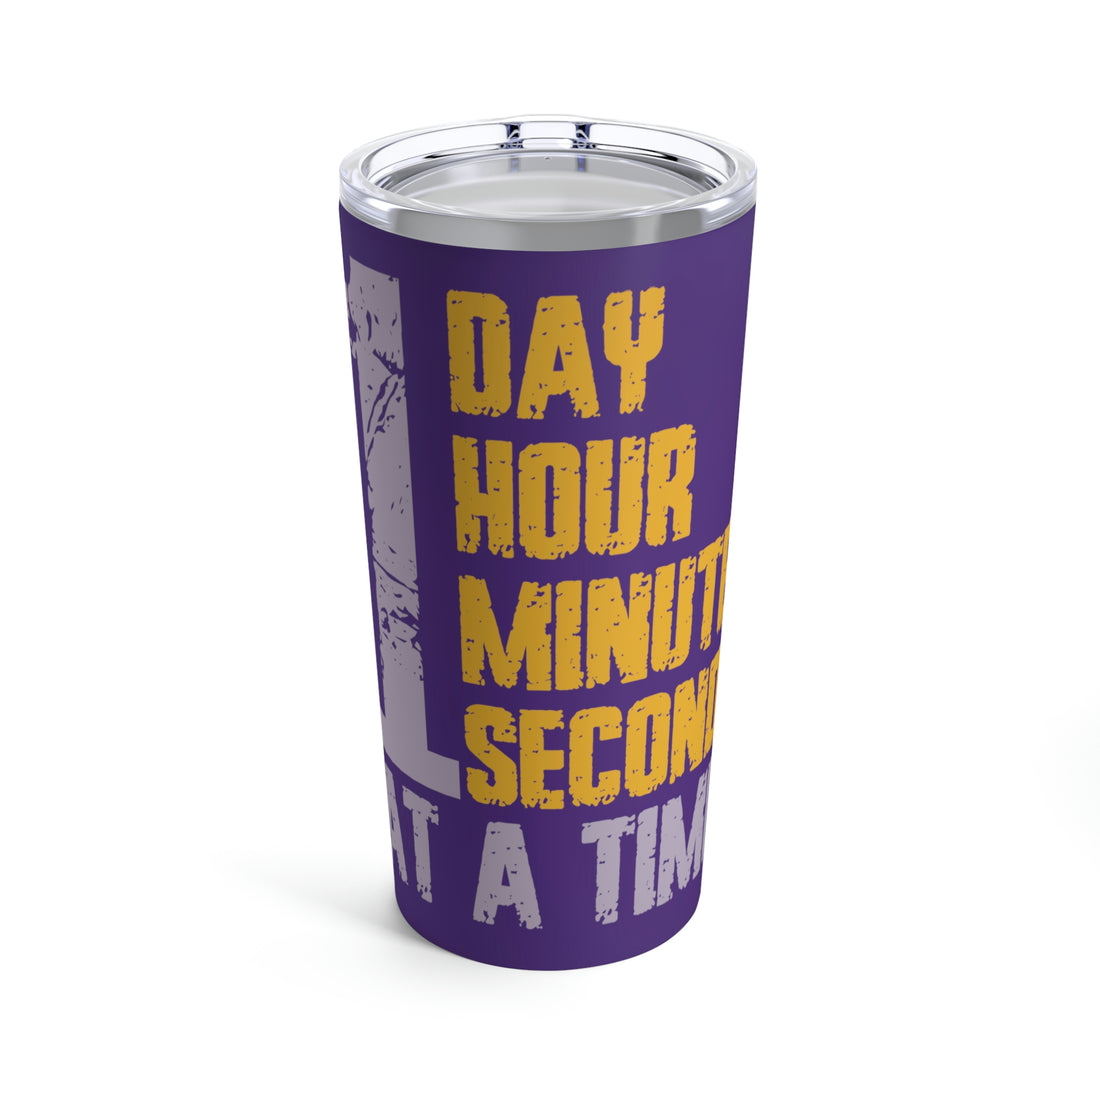 1 Day Hour Minute Second At A Time - Purple Tumbler 20oz